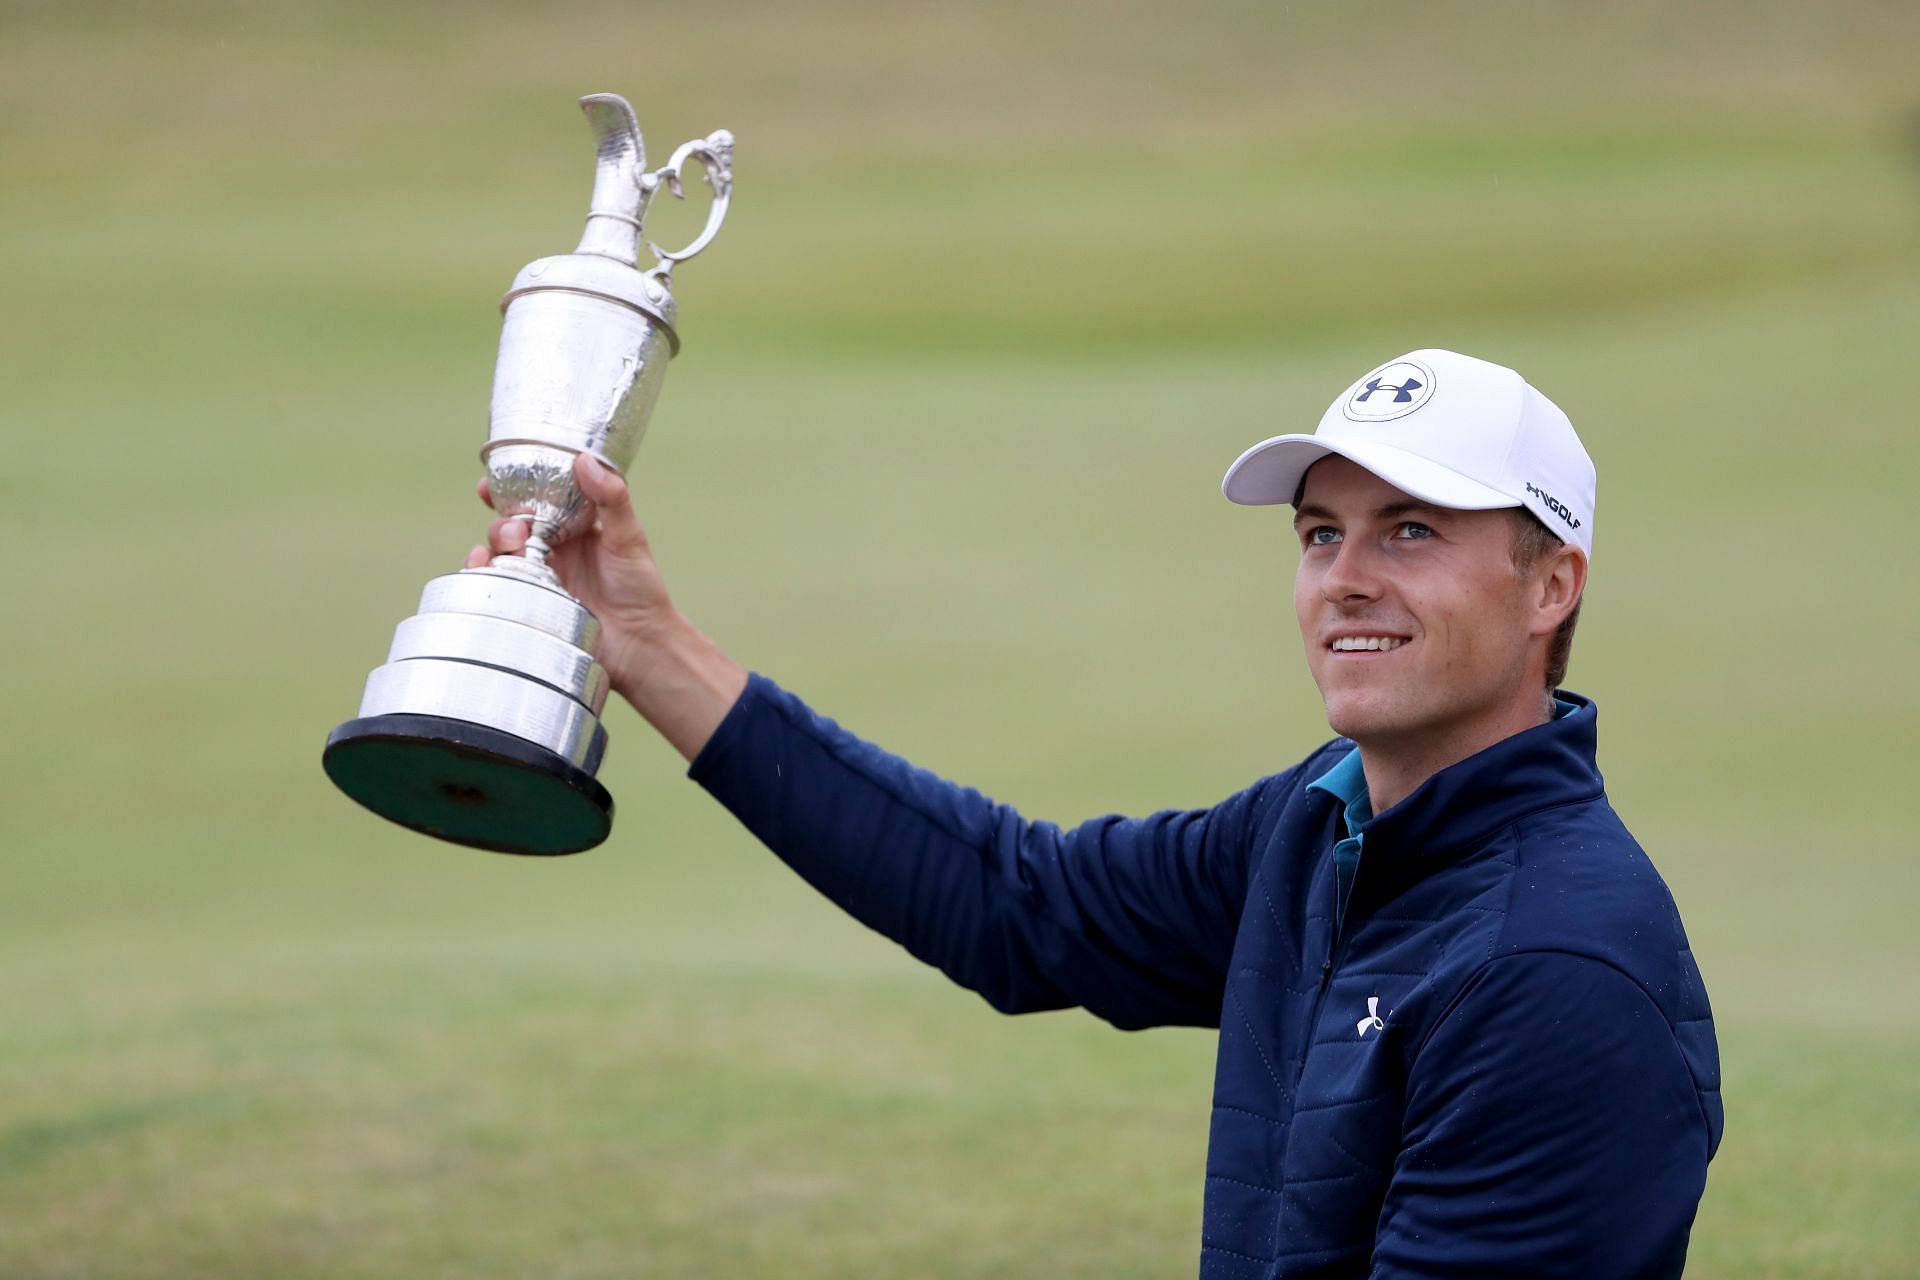 Jordan Spieth with The Open 2017 Trophy (via Getty Images)